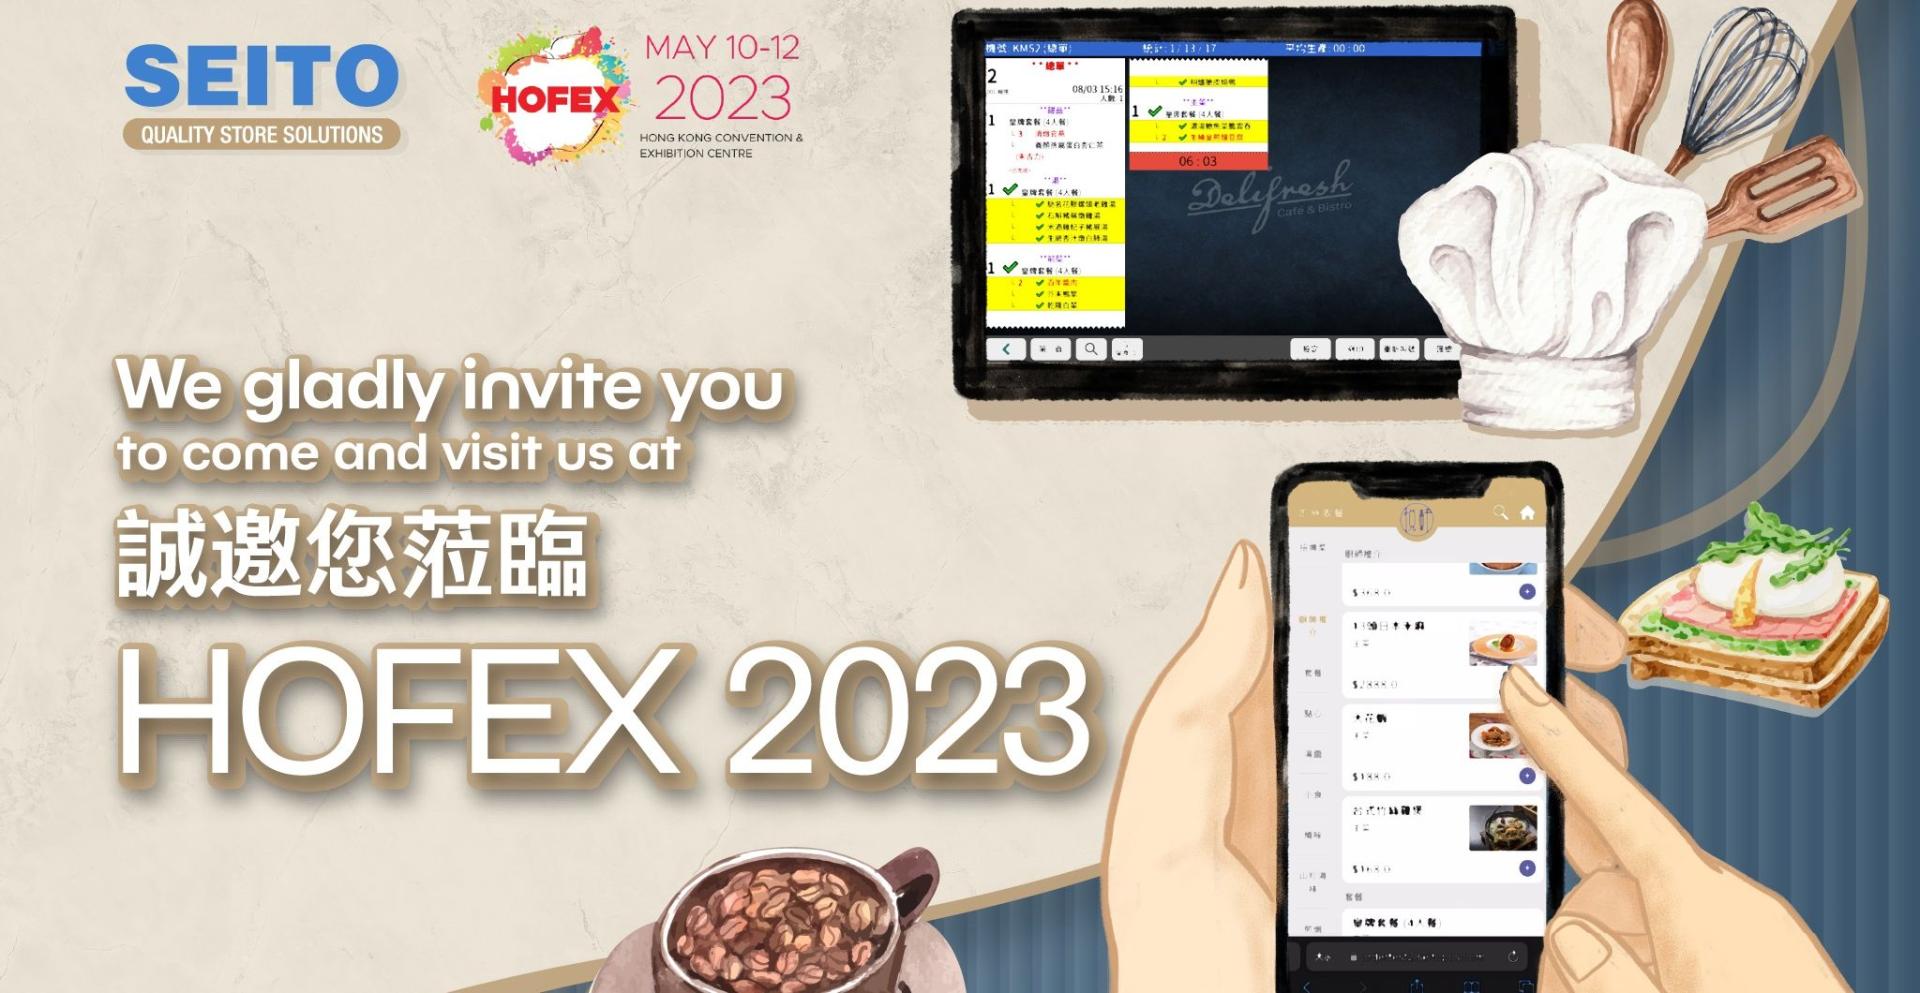 Seito joined HOFEX 2023